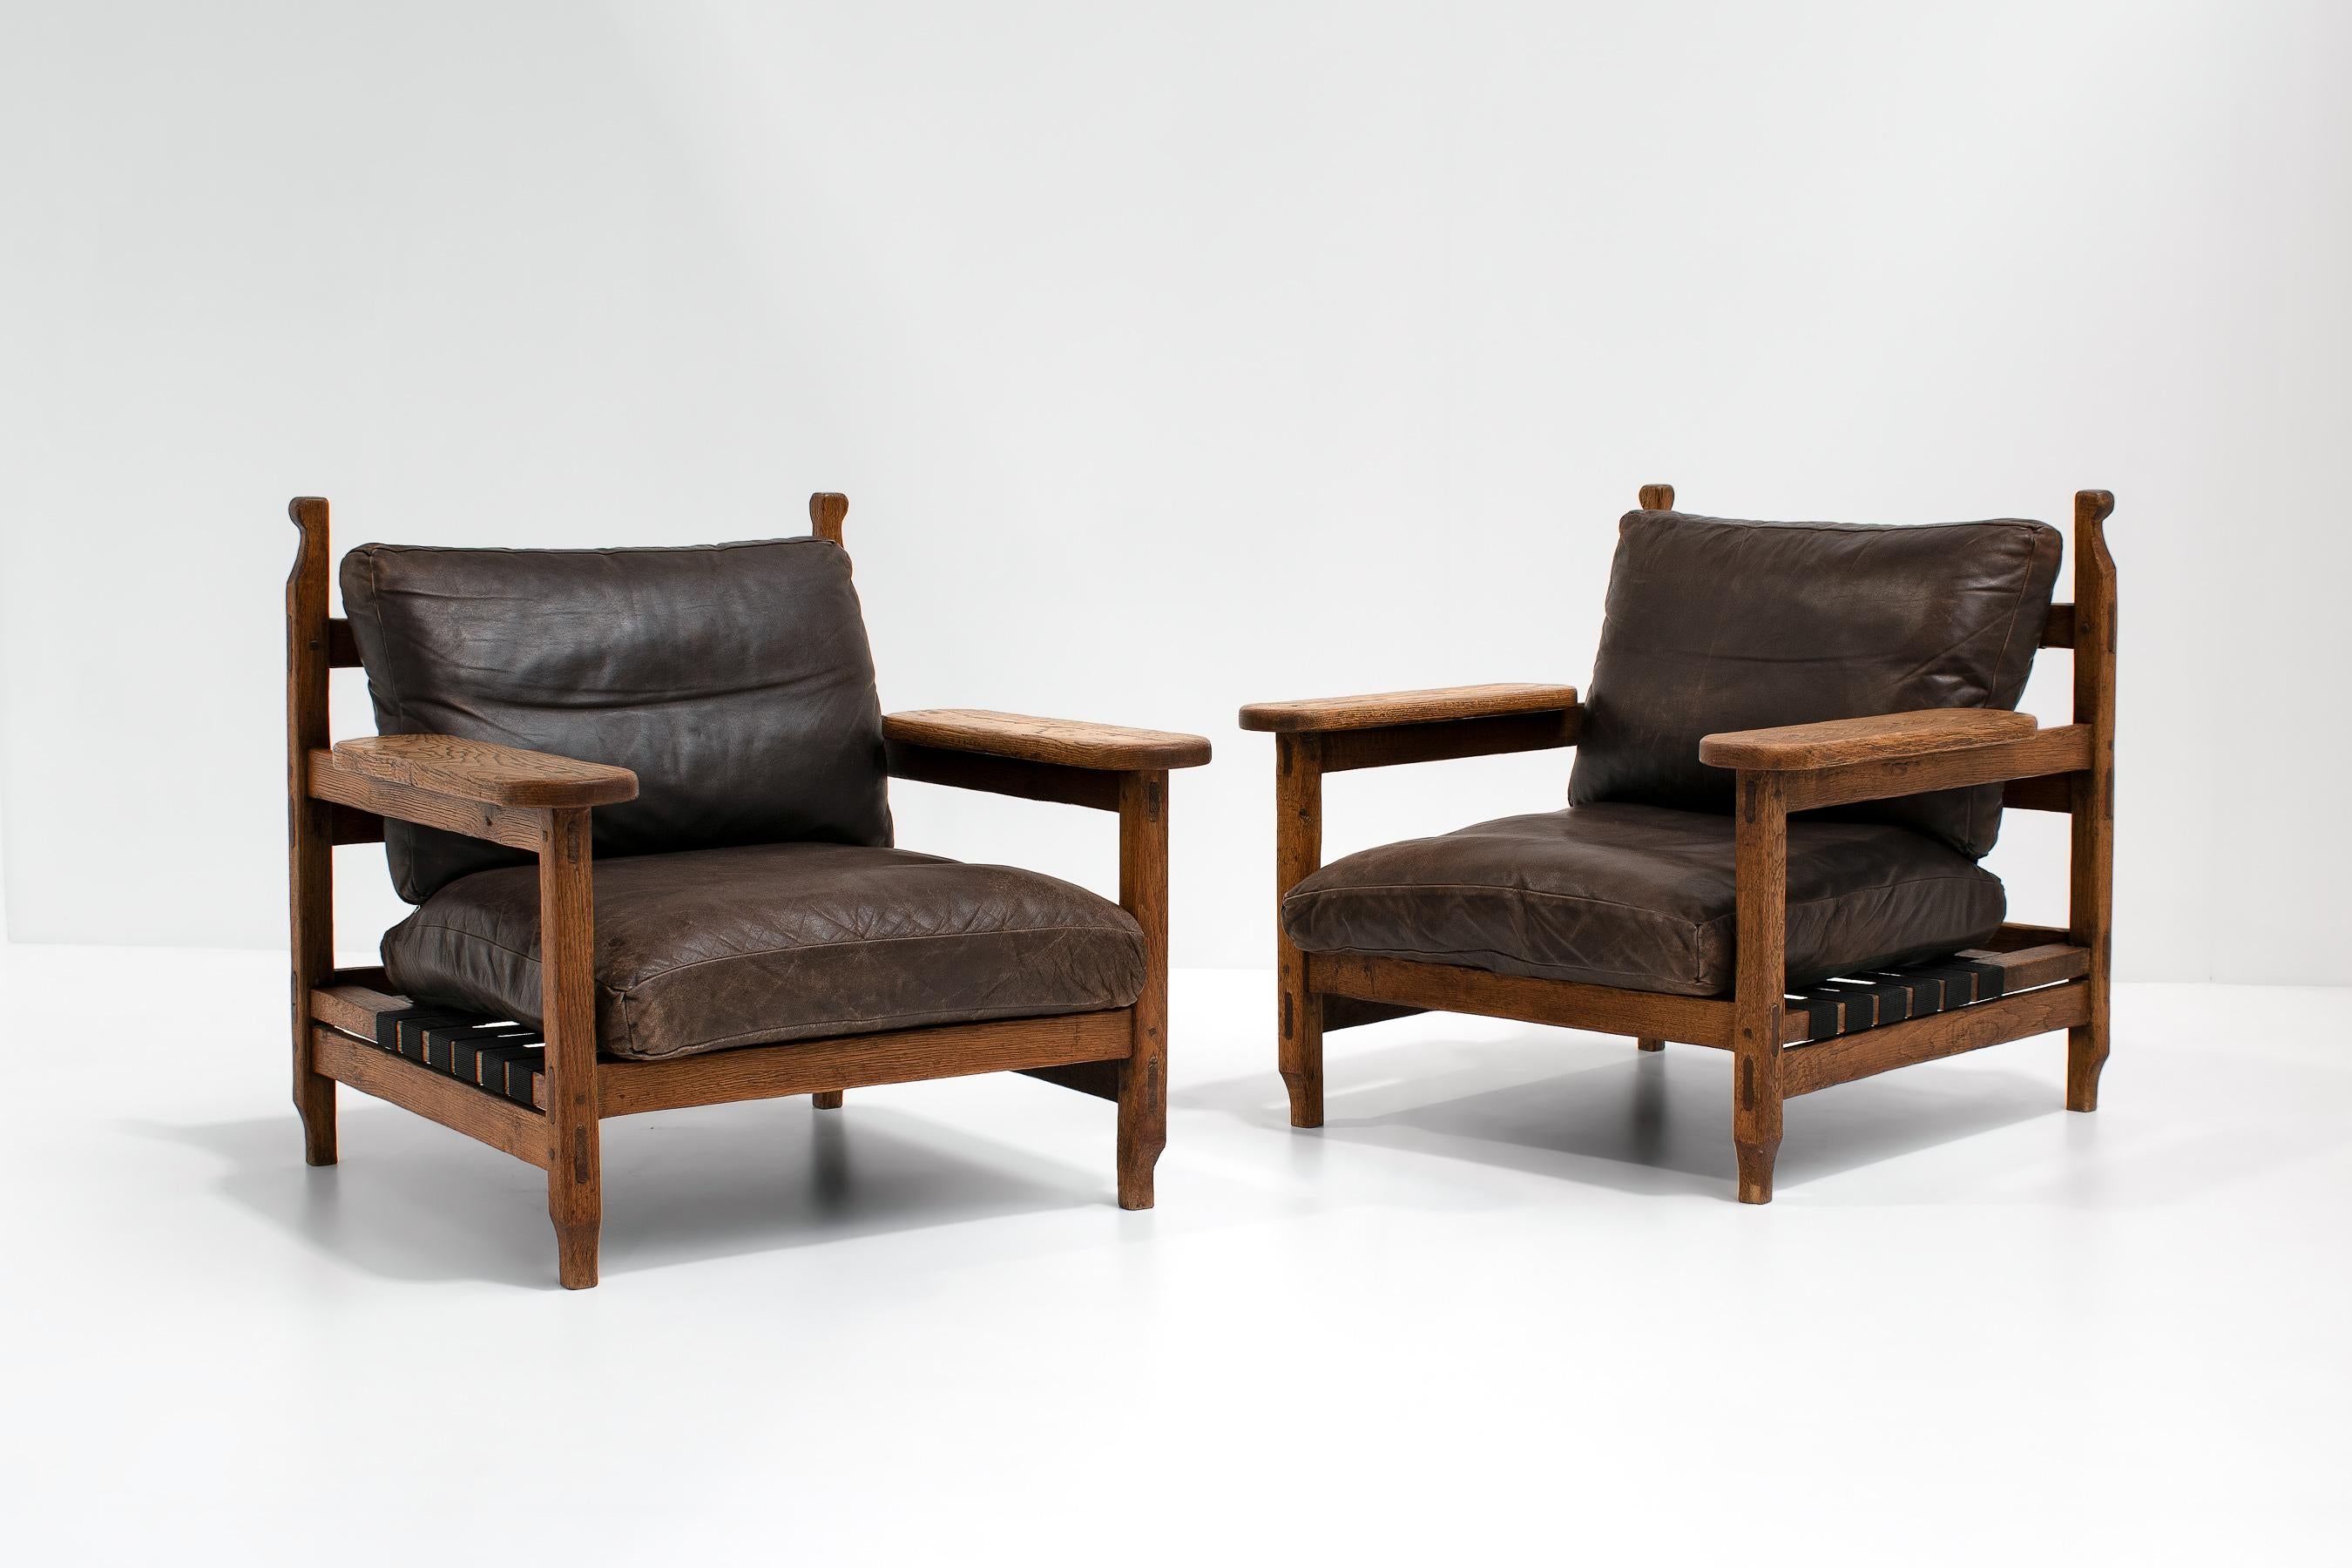 Unique pair of chunky brutalist lounge chairs in leather and oak, 1970s. Sourced in France.

Beautifully carved sculptural wooden frame in combination with thick brown patinated and original leather. 

Both chairs were left in their original